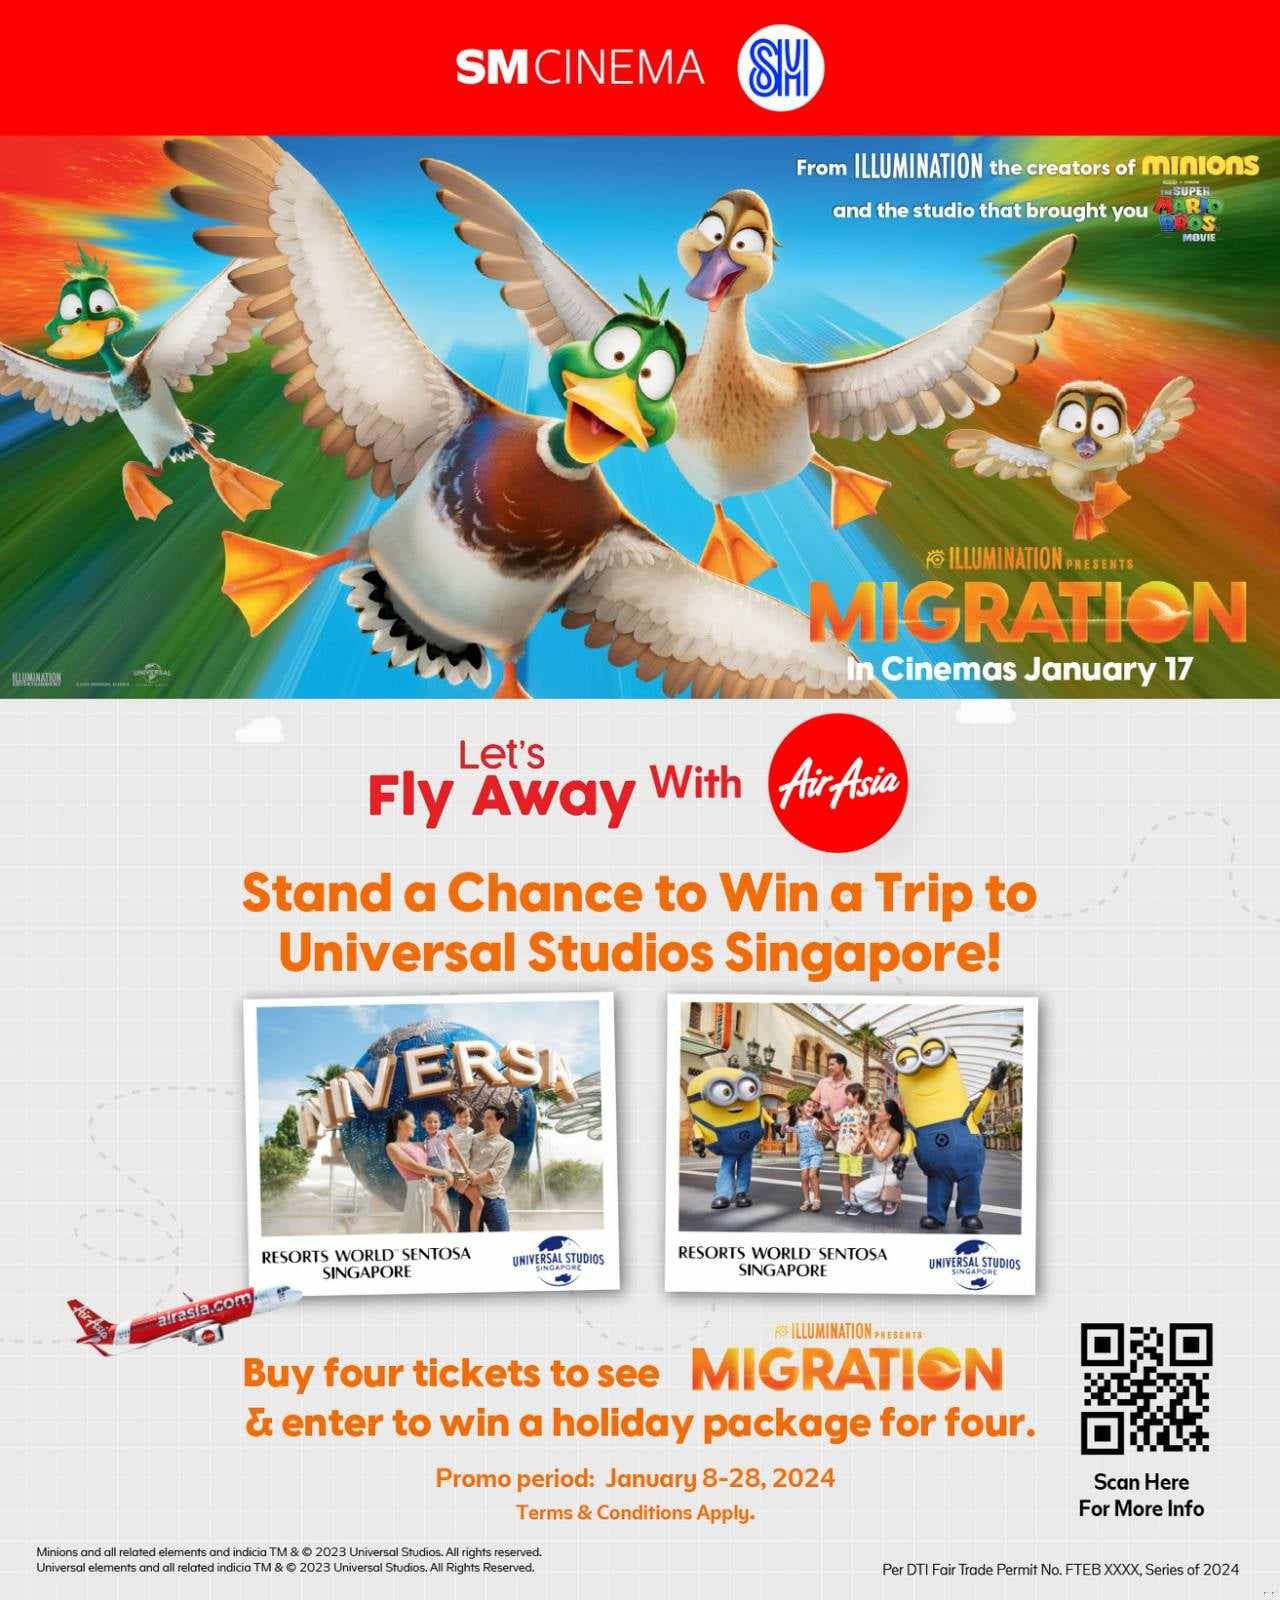 EXPERIENCE THE MOVIE ‘MIGRATION&#8217; ON THE BIG SCREEN AND STAND A CHANCE TO WIN A SINGAPORE GETAWAY WITH AIRASIA, UNIVERSAL STUDIOS, AND SM CINEMA